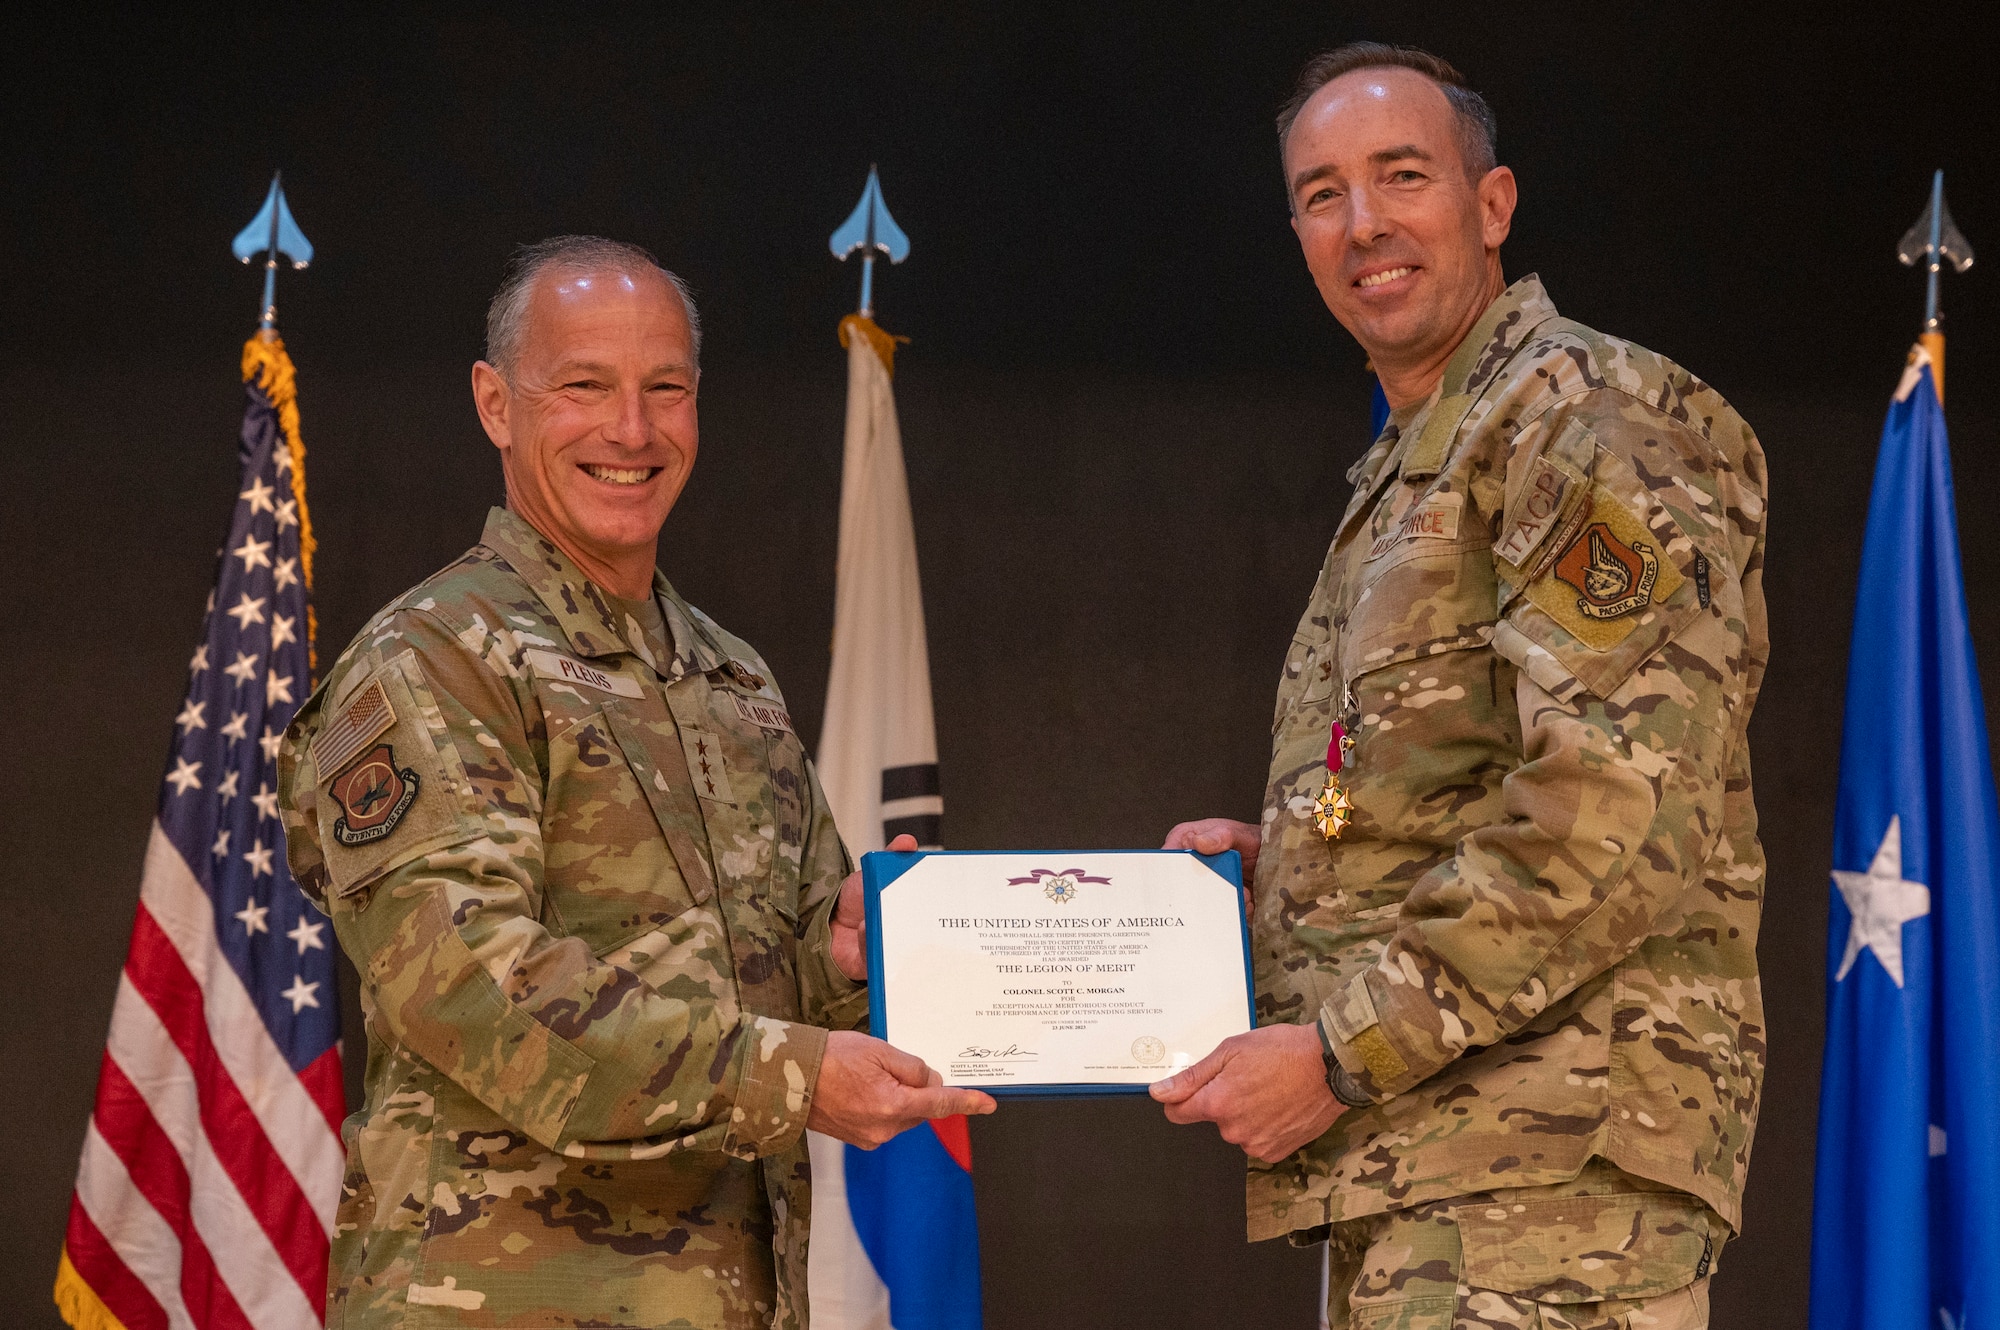 U.S. Air Force Lt. Gen. Scott Pleus, left, 7th Air Force commander, presents a Meritorious Service Medal (MSM) to Col. Scott Morgan, 607th Air Support Operations Group outgoing commander, at Osan Air Base, Republic of Korea, June 26, 2023. The MSM is a military decoration awarded by various branches of the Armed Forces to recognize distinguished or outstanding meritorious service. (U.S. Air Force photo by Senior Airman Aaron Edwards)